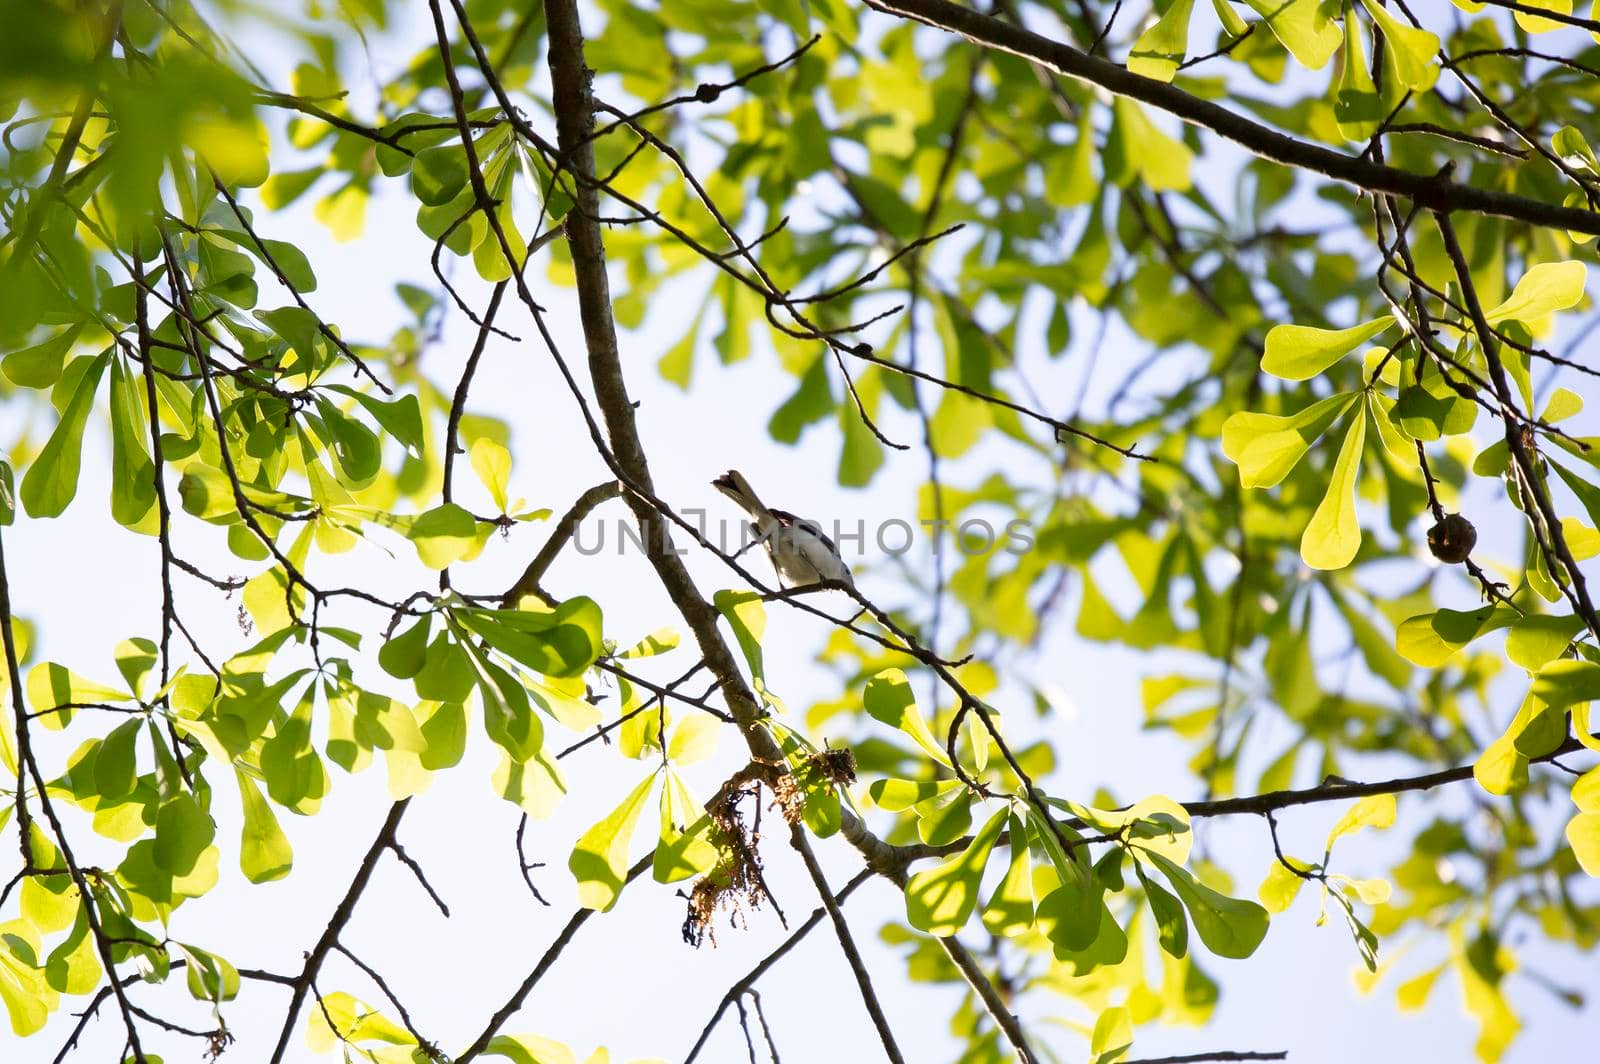 Blue-gray gnatcatcher (Polioptila caerulea) looking out majestically as it forages on a tree